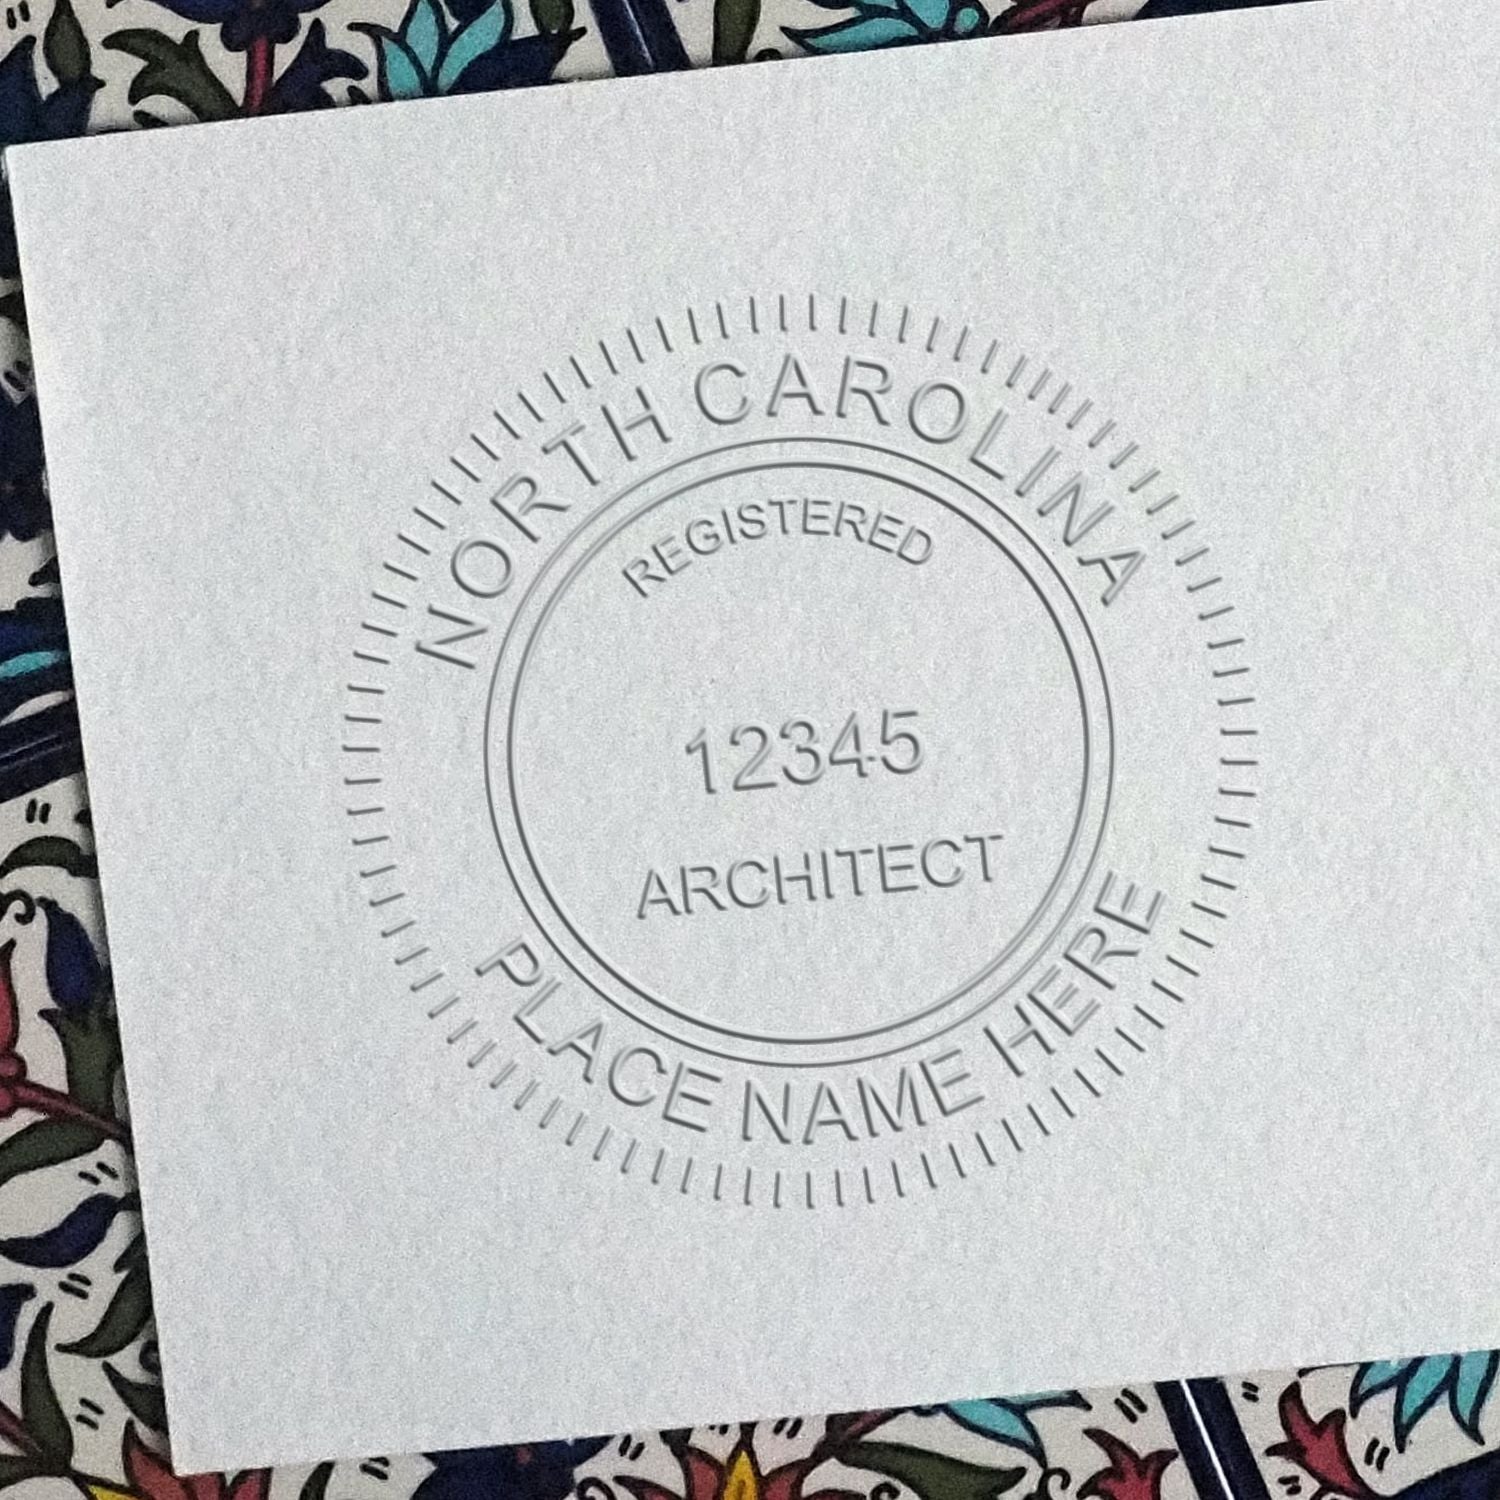 An alternative view of the State of North Carolina Long Reach Architectural Embossing Seal stamped on a sheet of paper showing the image in use